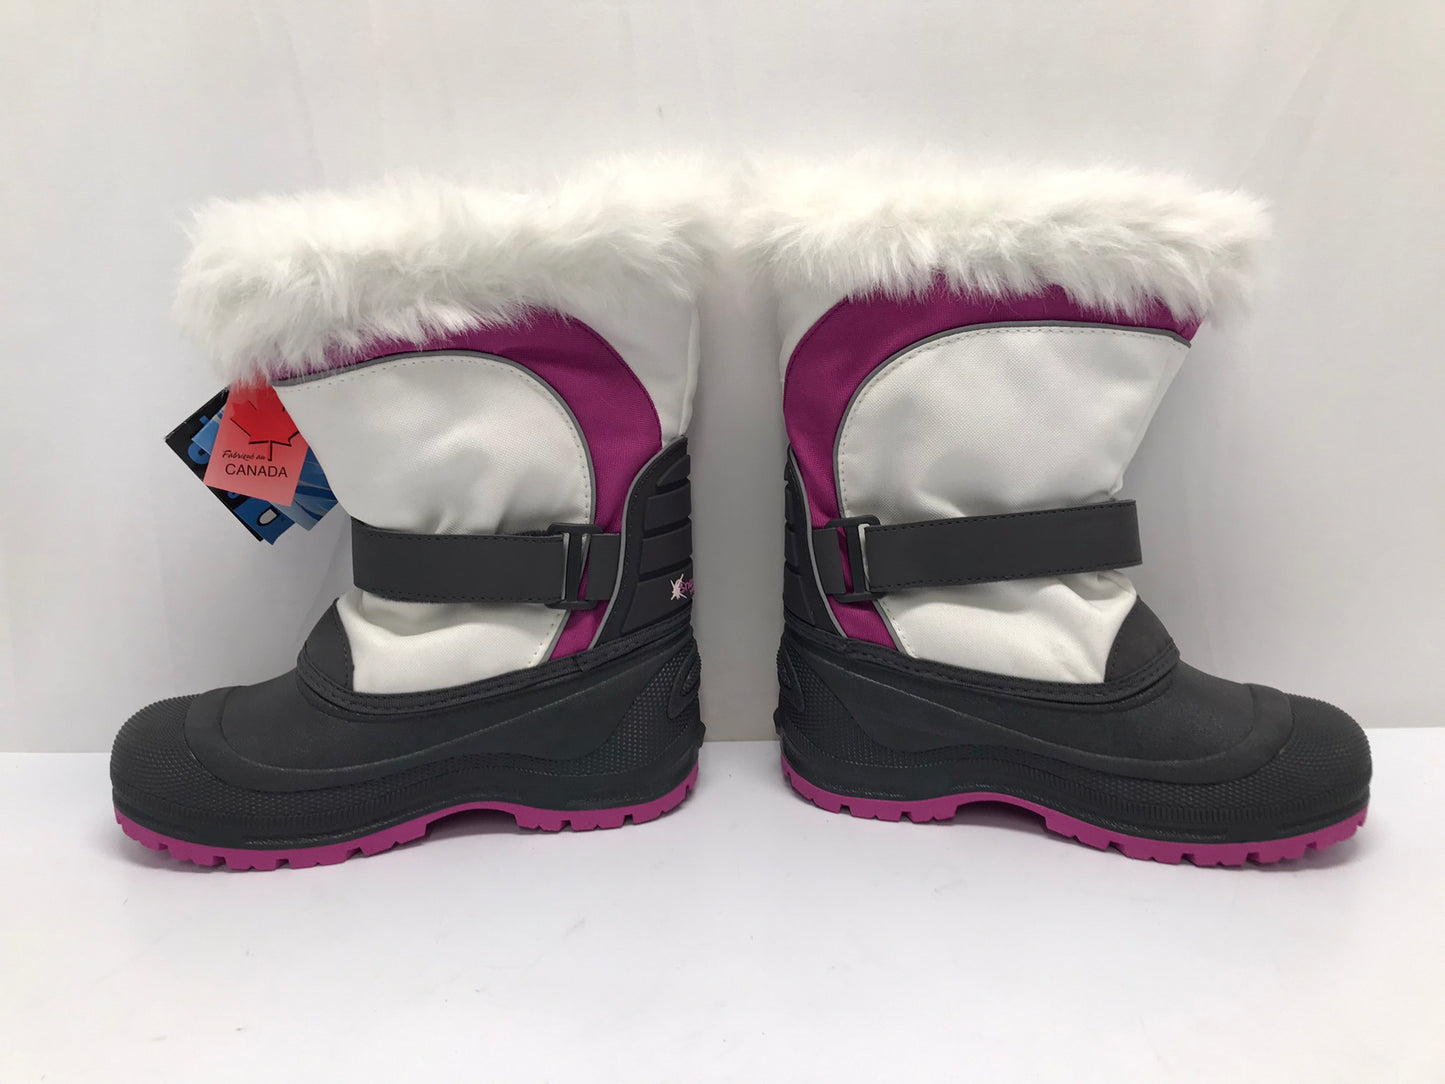 Winter Boots Child Size 5 Youth Canadian -58 Degree With Liner Grey Pink White Faux Fur New With Tags